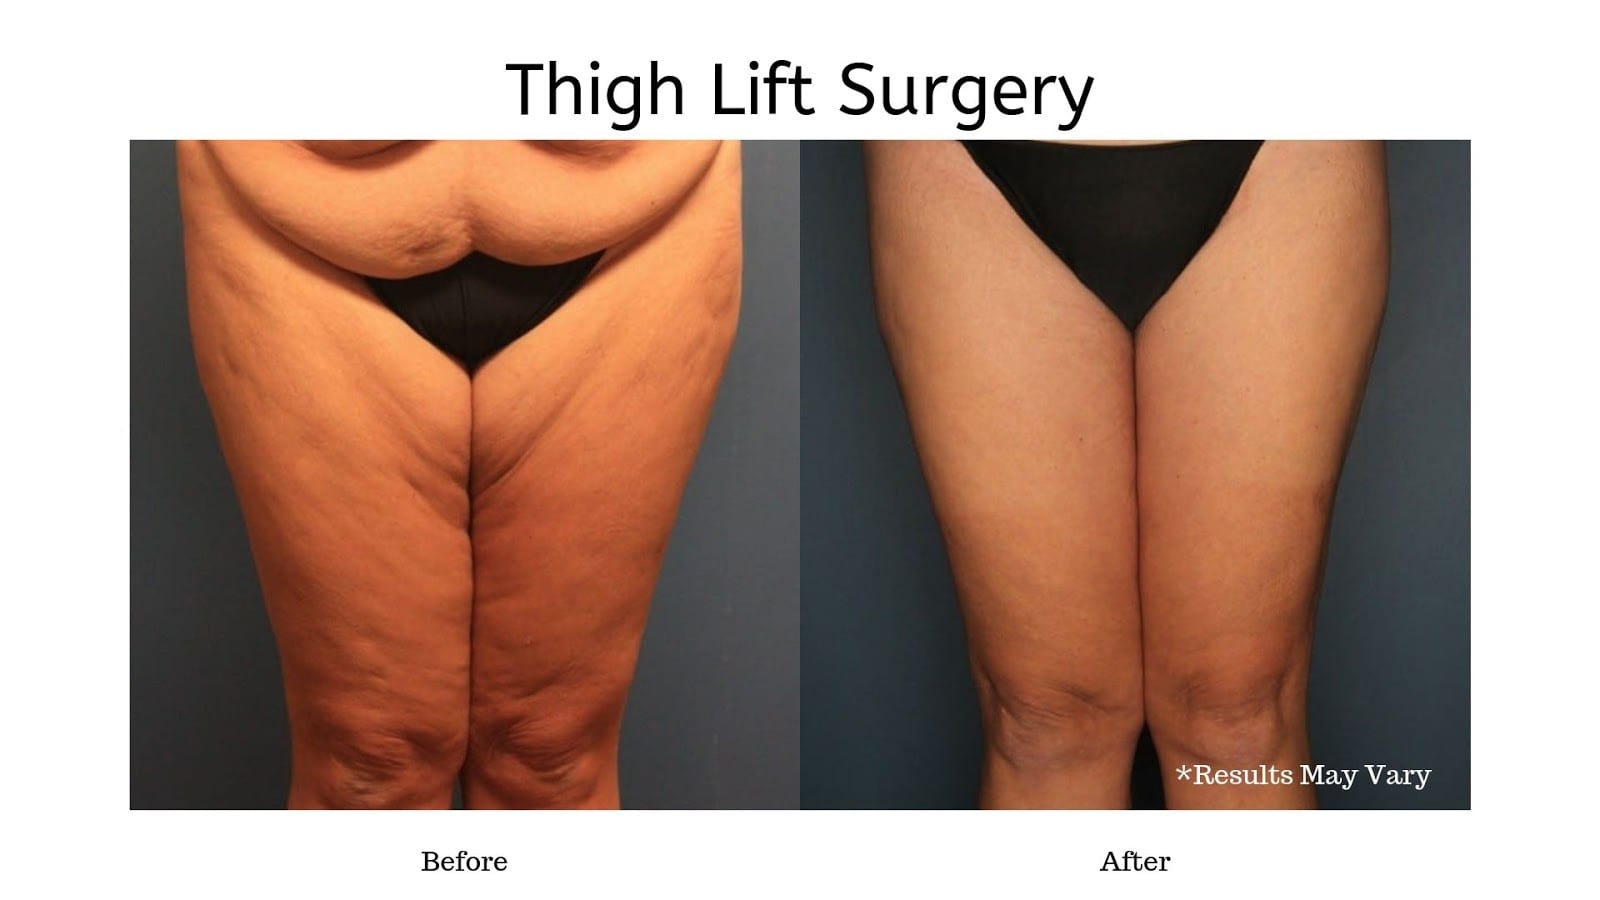 Get Beautiful Legs With (Or Without) Surgery